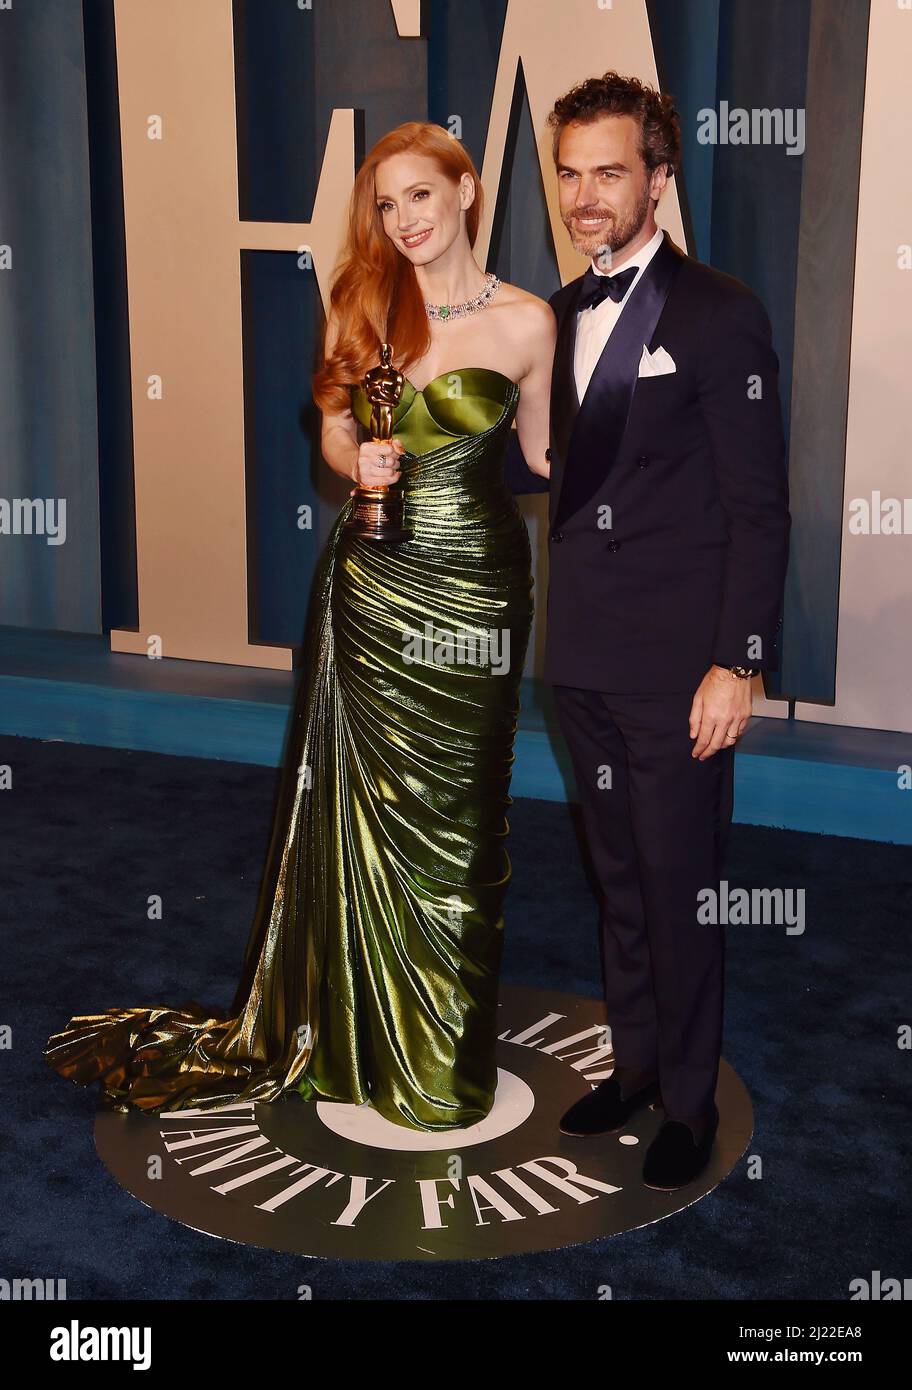 BEVERLY HILLS, CA - MARCH 28: (L-R) Jessica Chastain and Gian Luca Passi de Preposulo attend the 2022 Vanity Fair Oscar Party hosted by Radhika Jones Stock Photo